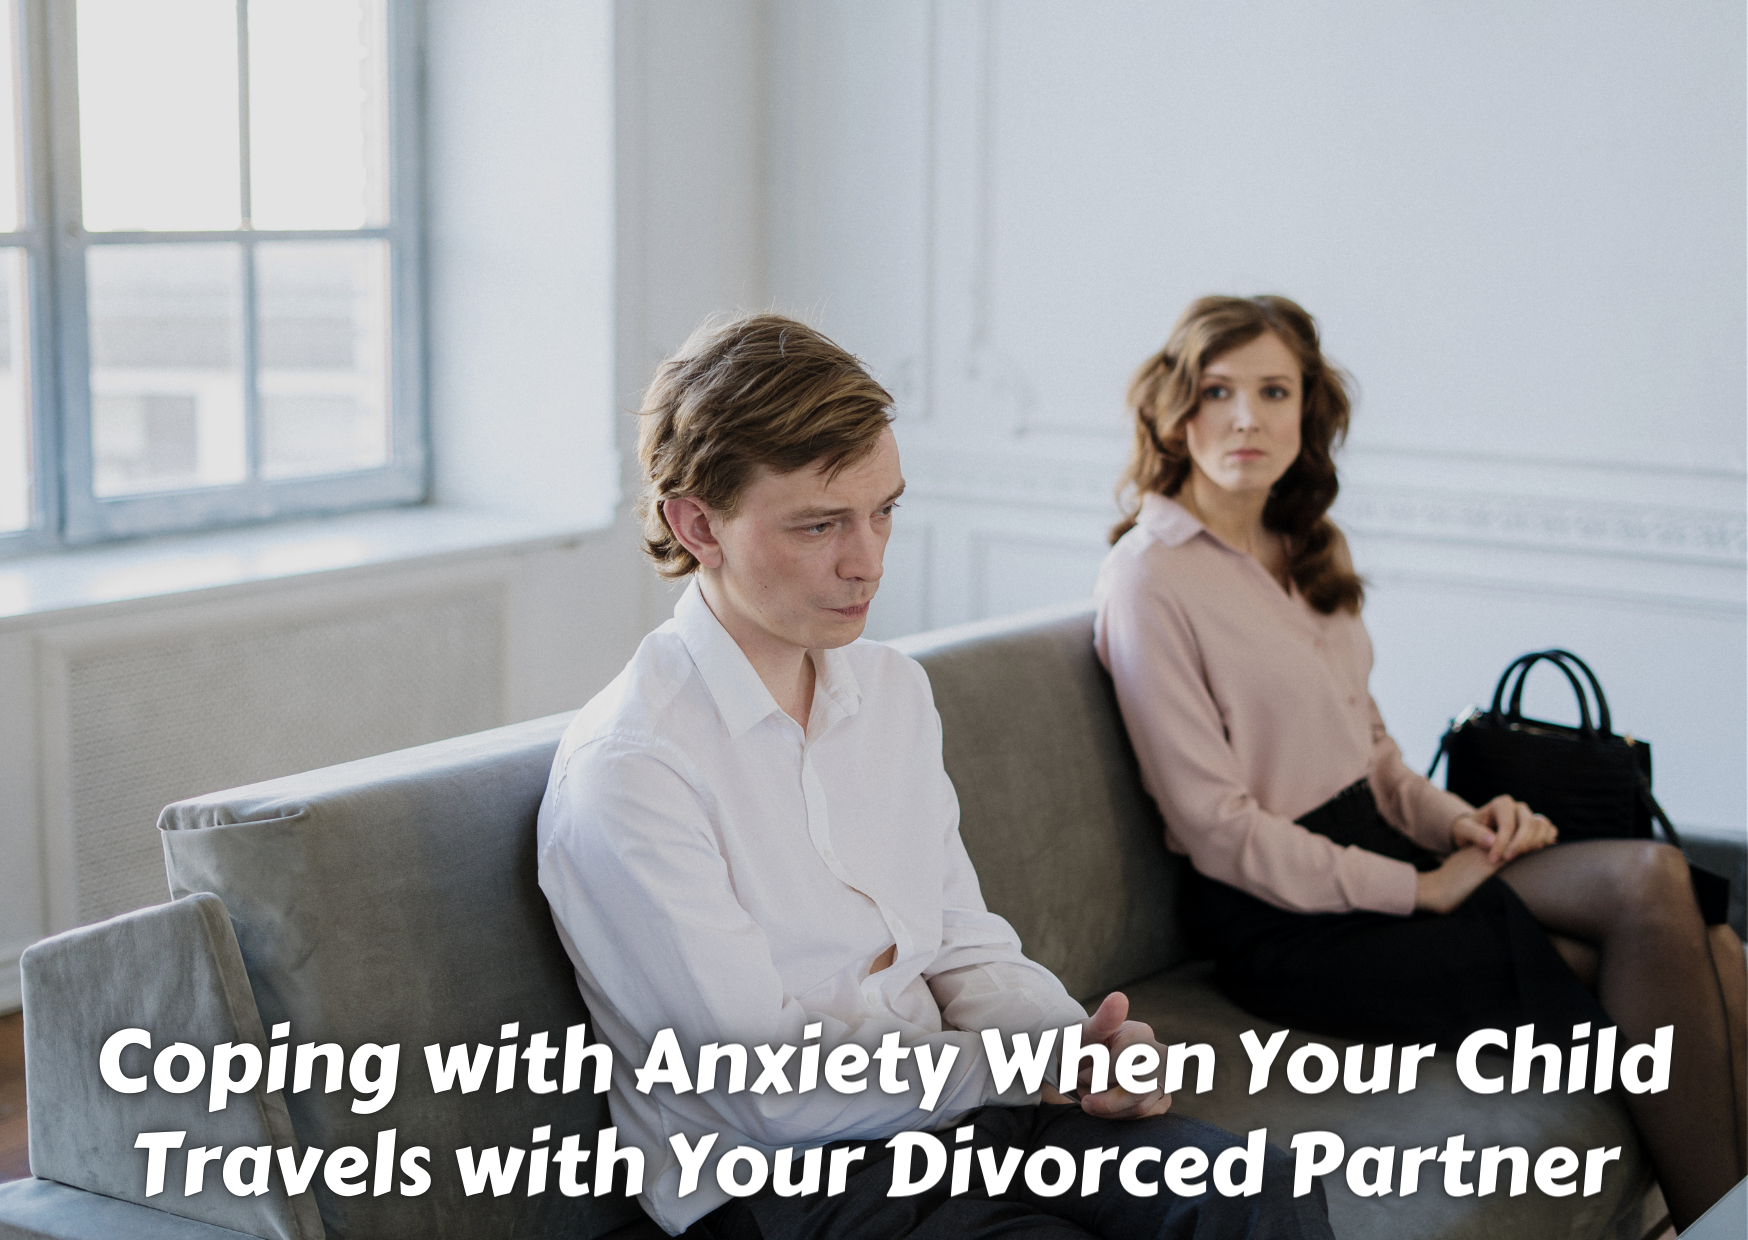 Coping with Anxiety When Your Child Travels with Your Divorced Partner